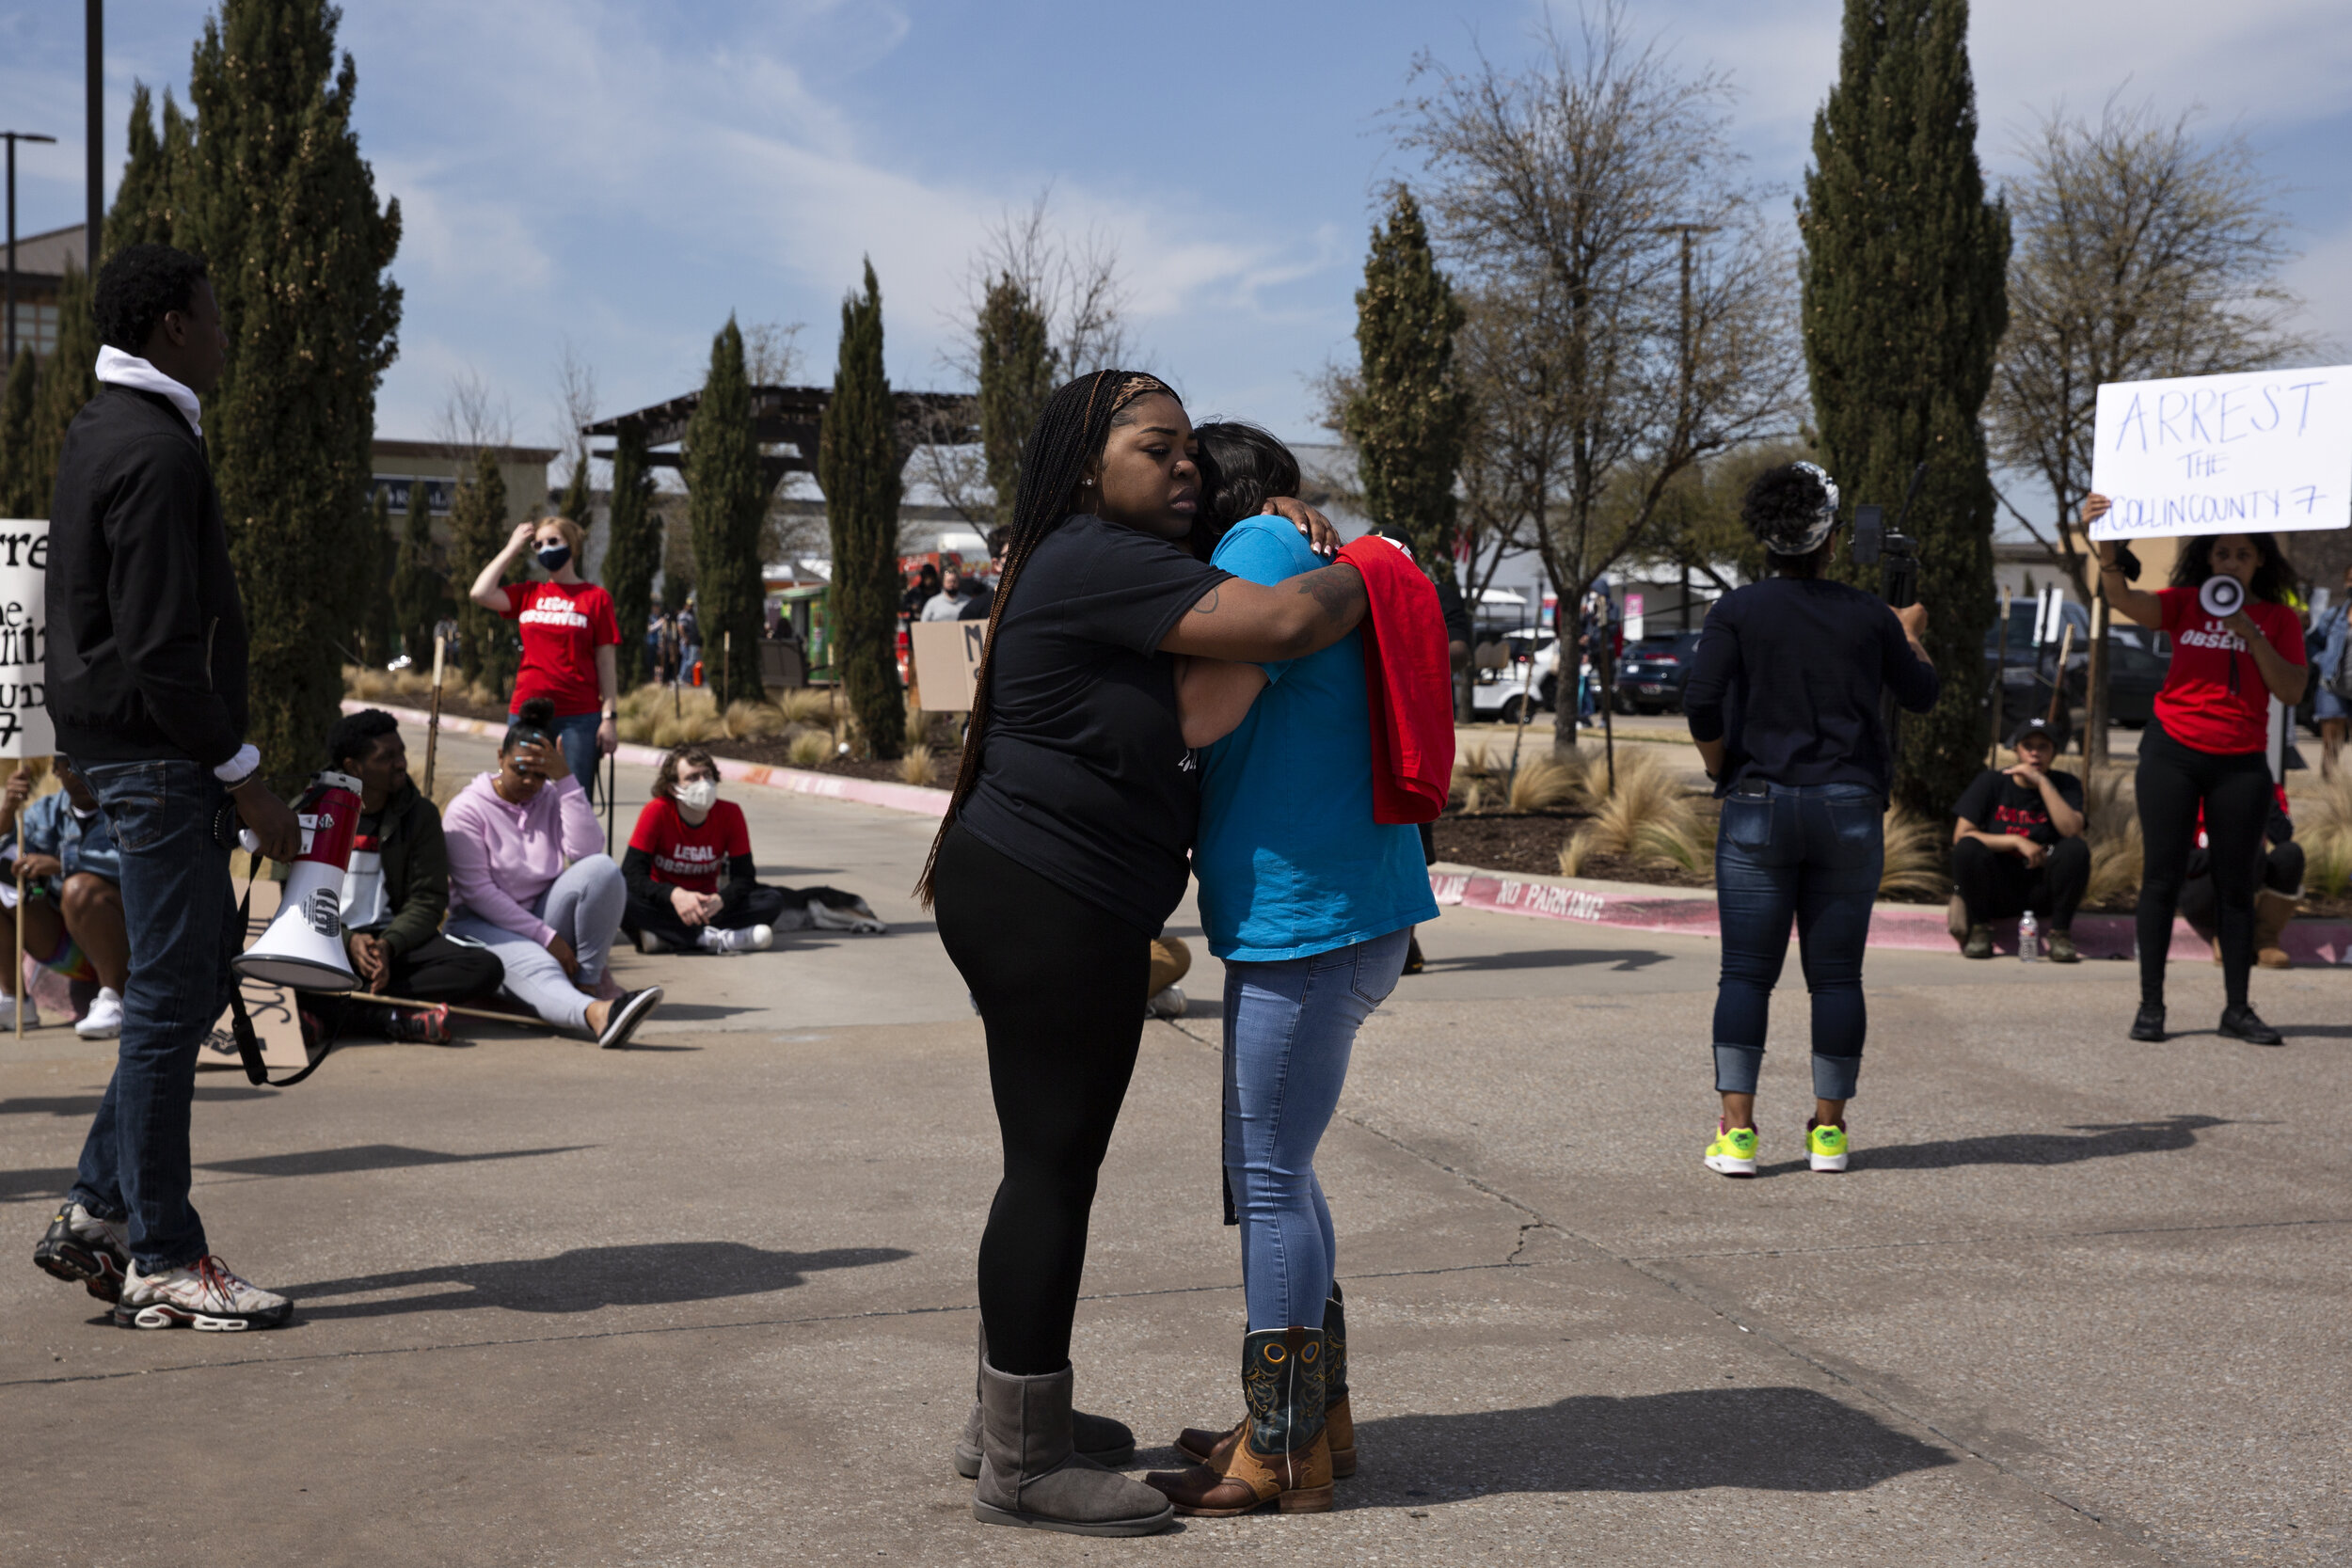  LaChay Batts comforts Monica Diaz after Monica spoke about Marvin Scott III, one of her best friends. Monica spoke about Marvin’s endless kindness, crying as she told the crowd “Even when I was at my worst, he told me I was beautiful.” 